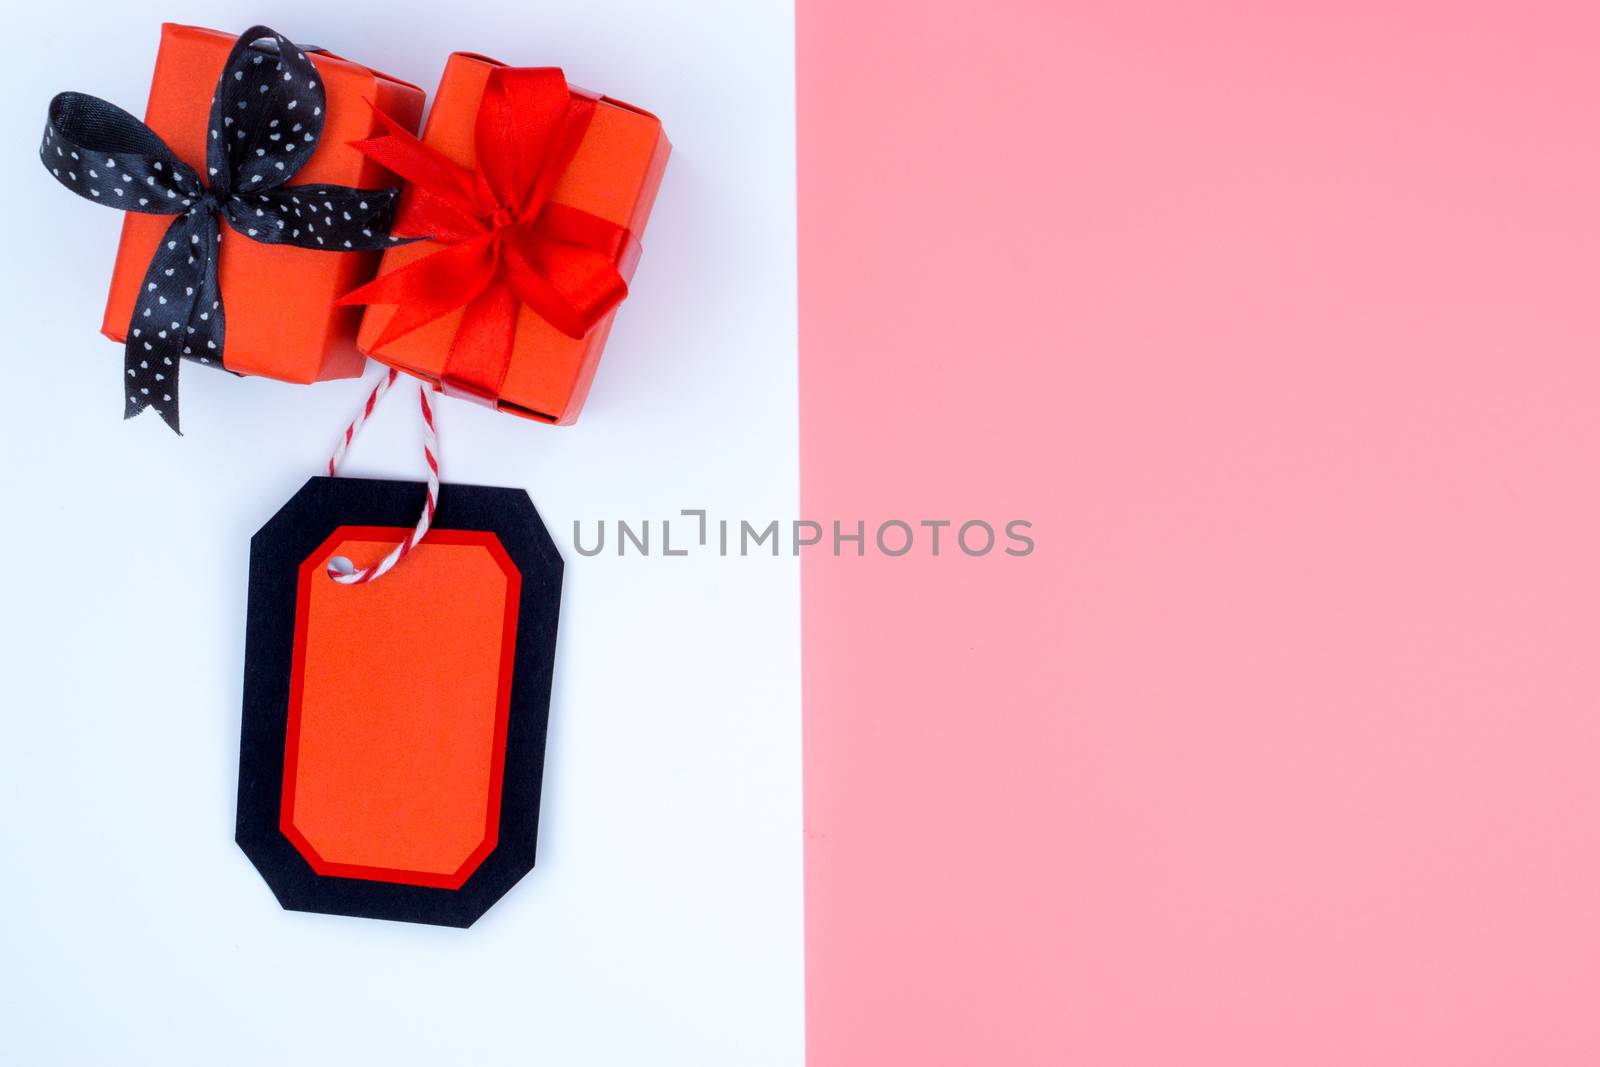 Online shopping of China, The Christmas boxes with red ribbon and shopping tag on a white and pink background with copy space for text. 11.11 single's day sale concept